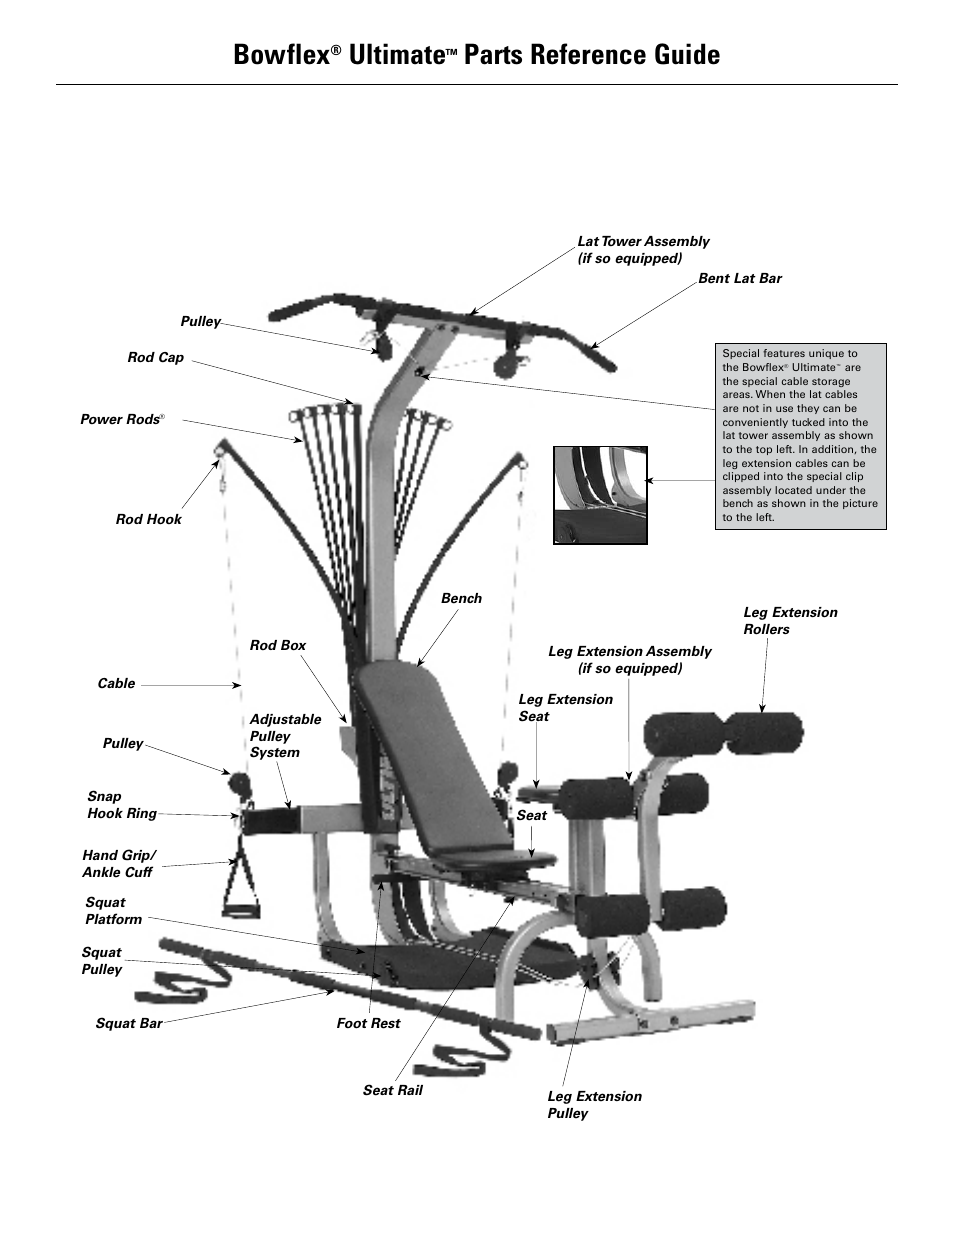 Bowflex, Ultimate, Parts reference guide | Bowflex Ultimate User Manual | Page 88 / 110